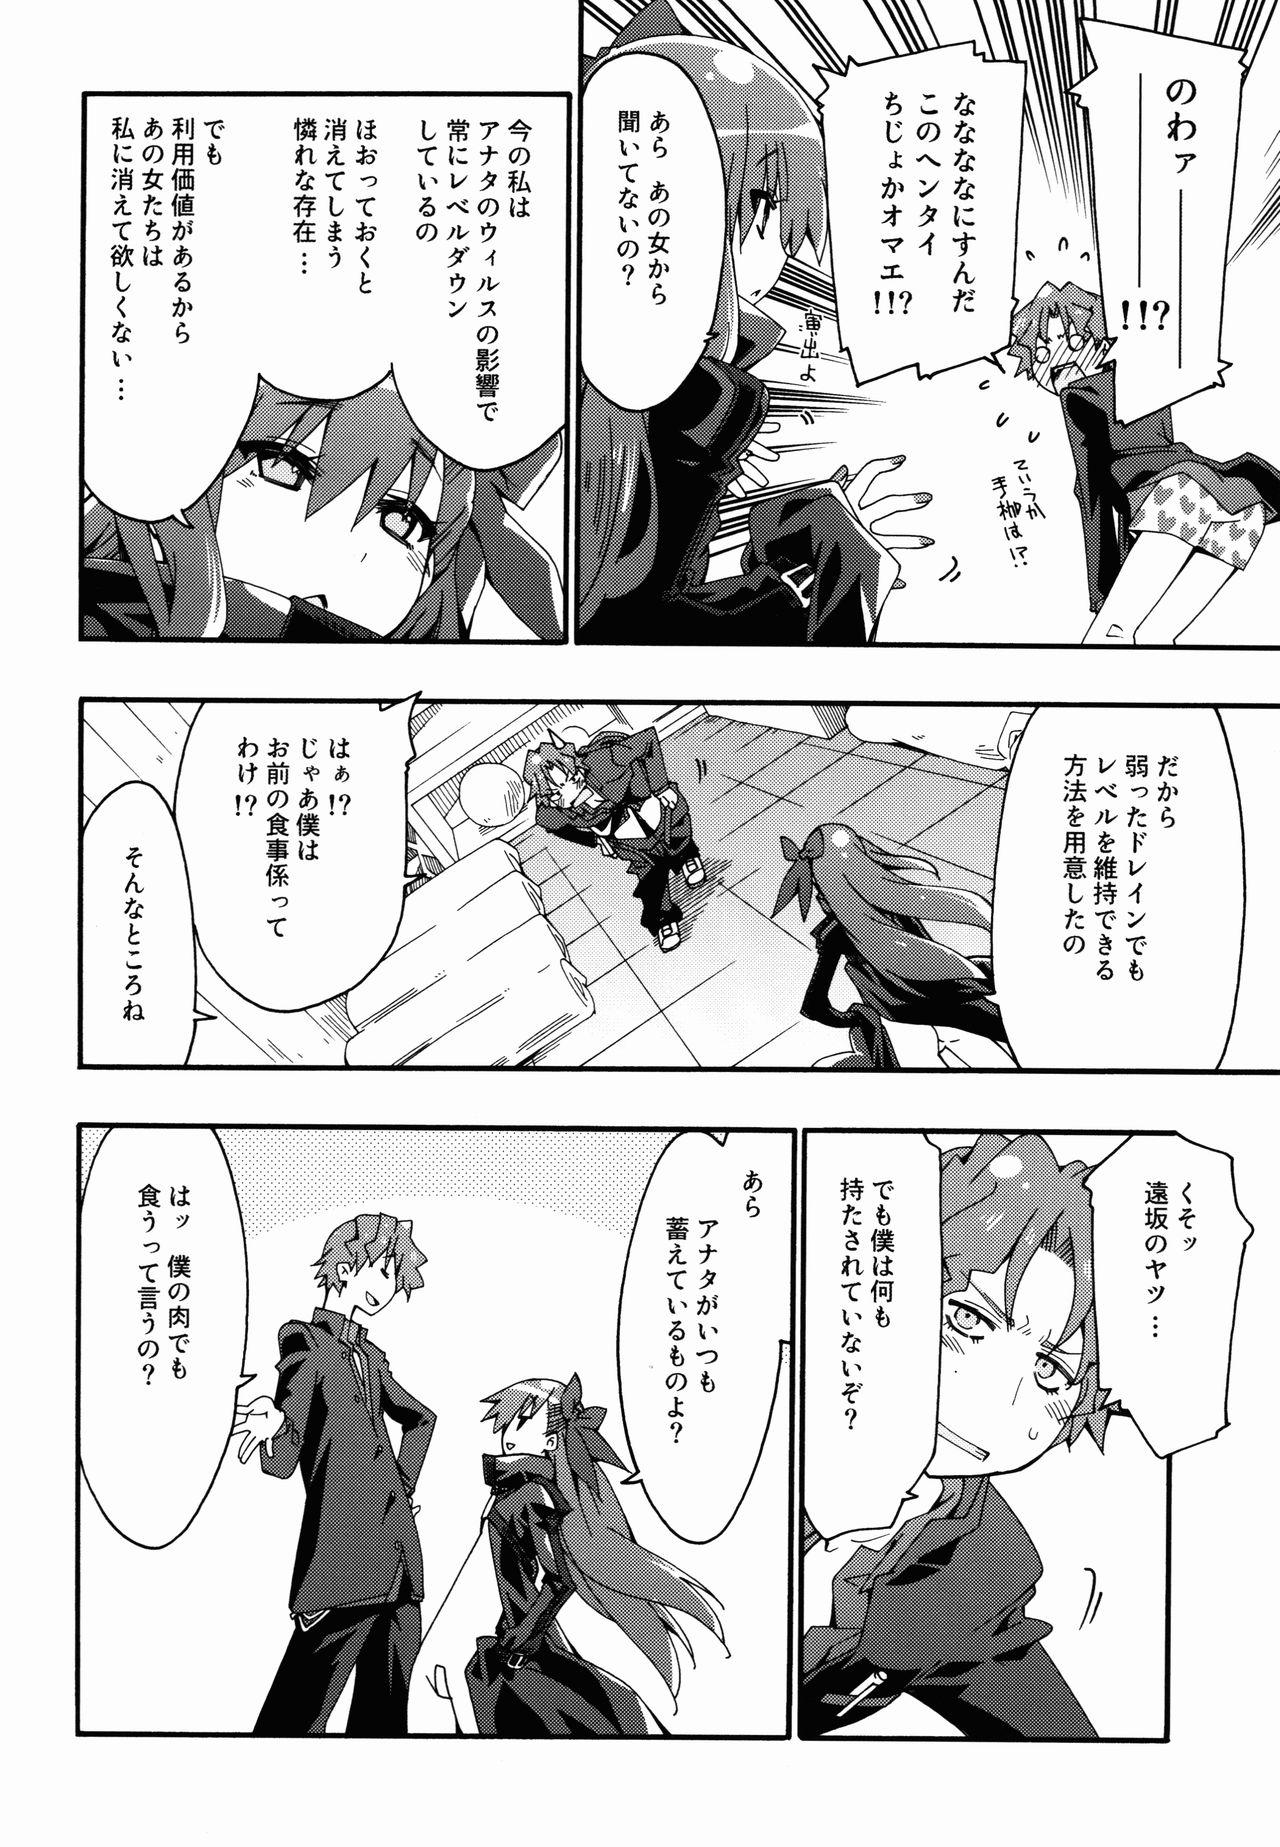 Cumming Melty/kiss - Fate extra Famosa - Page 10